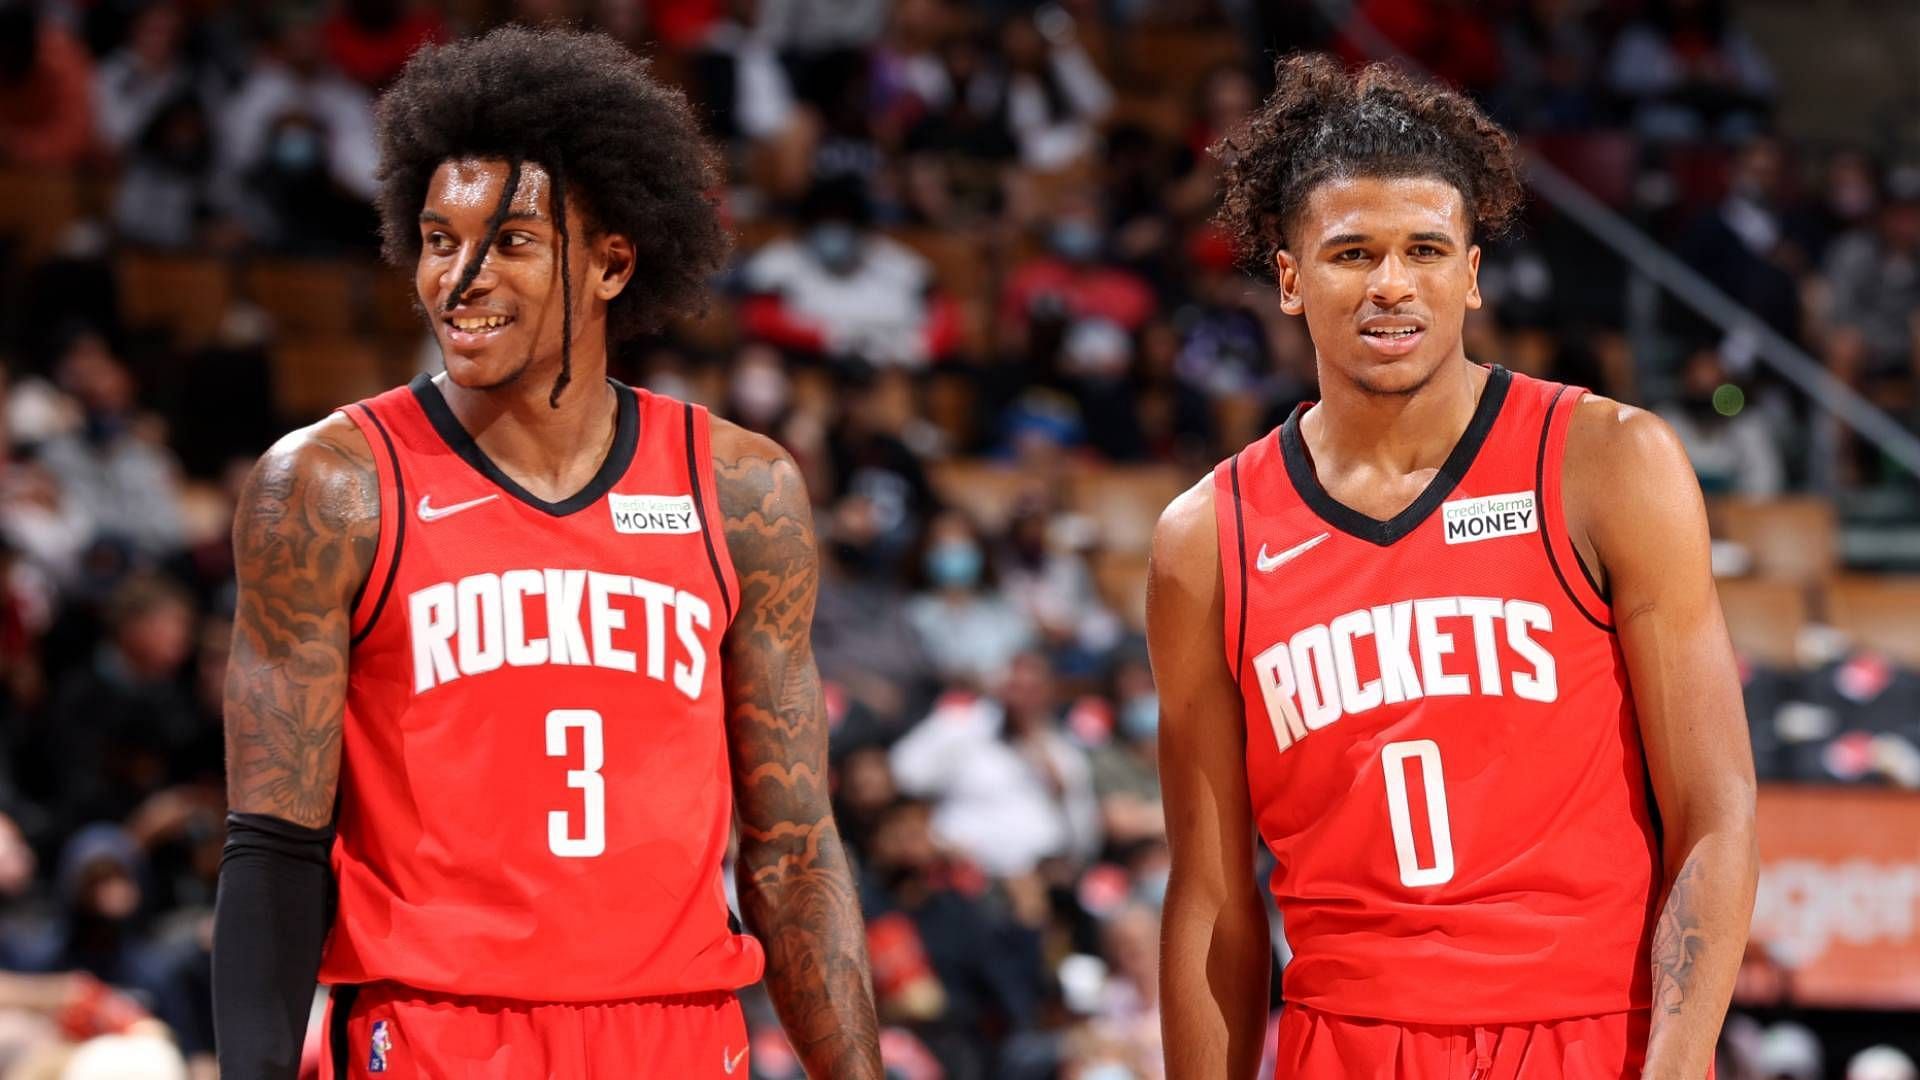 The Houston Rockets are betting big on the development of Jalen Green and Kevin Porter Jr. to be competitive this season. [Photo: NBA.com India]